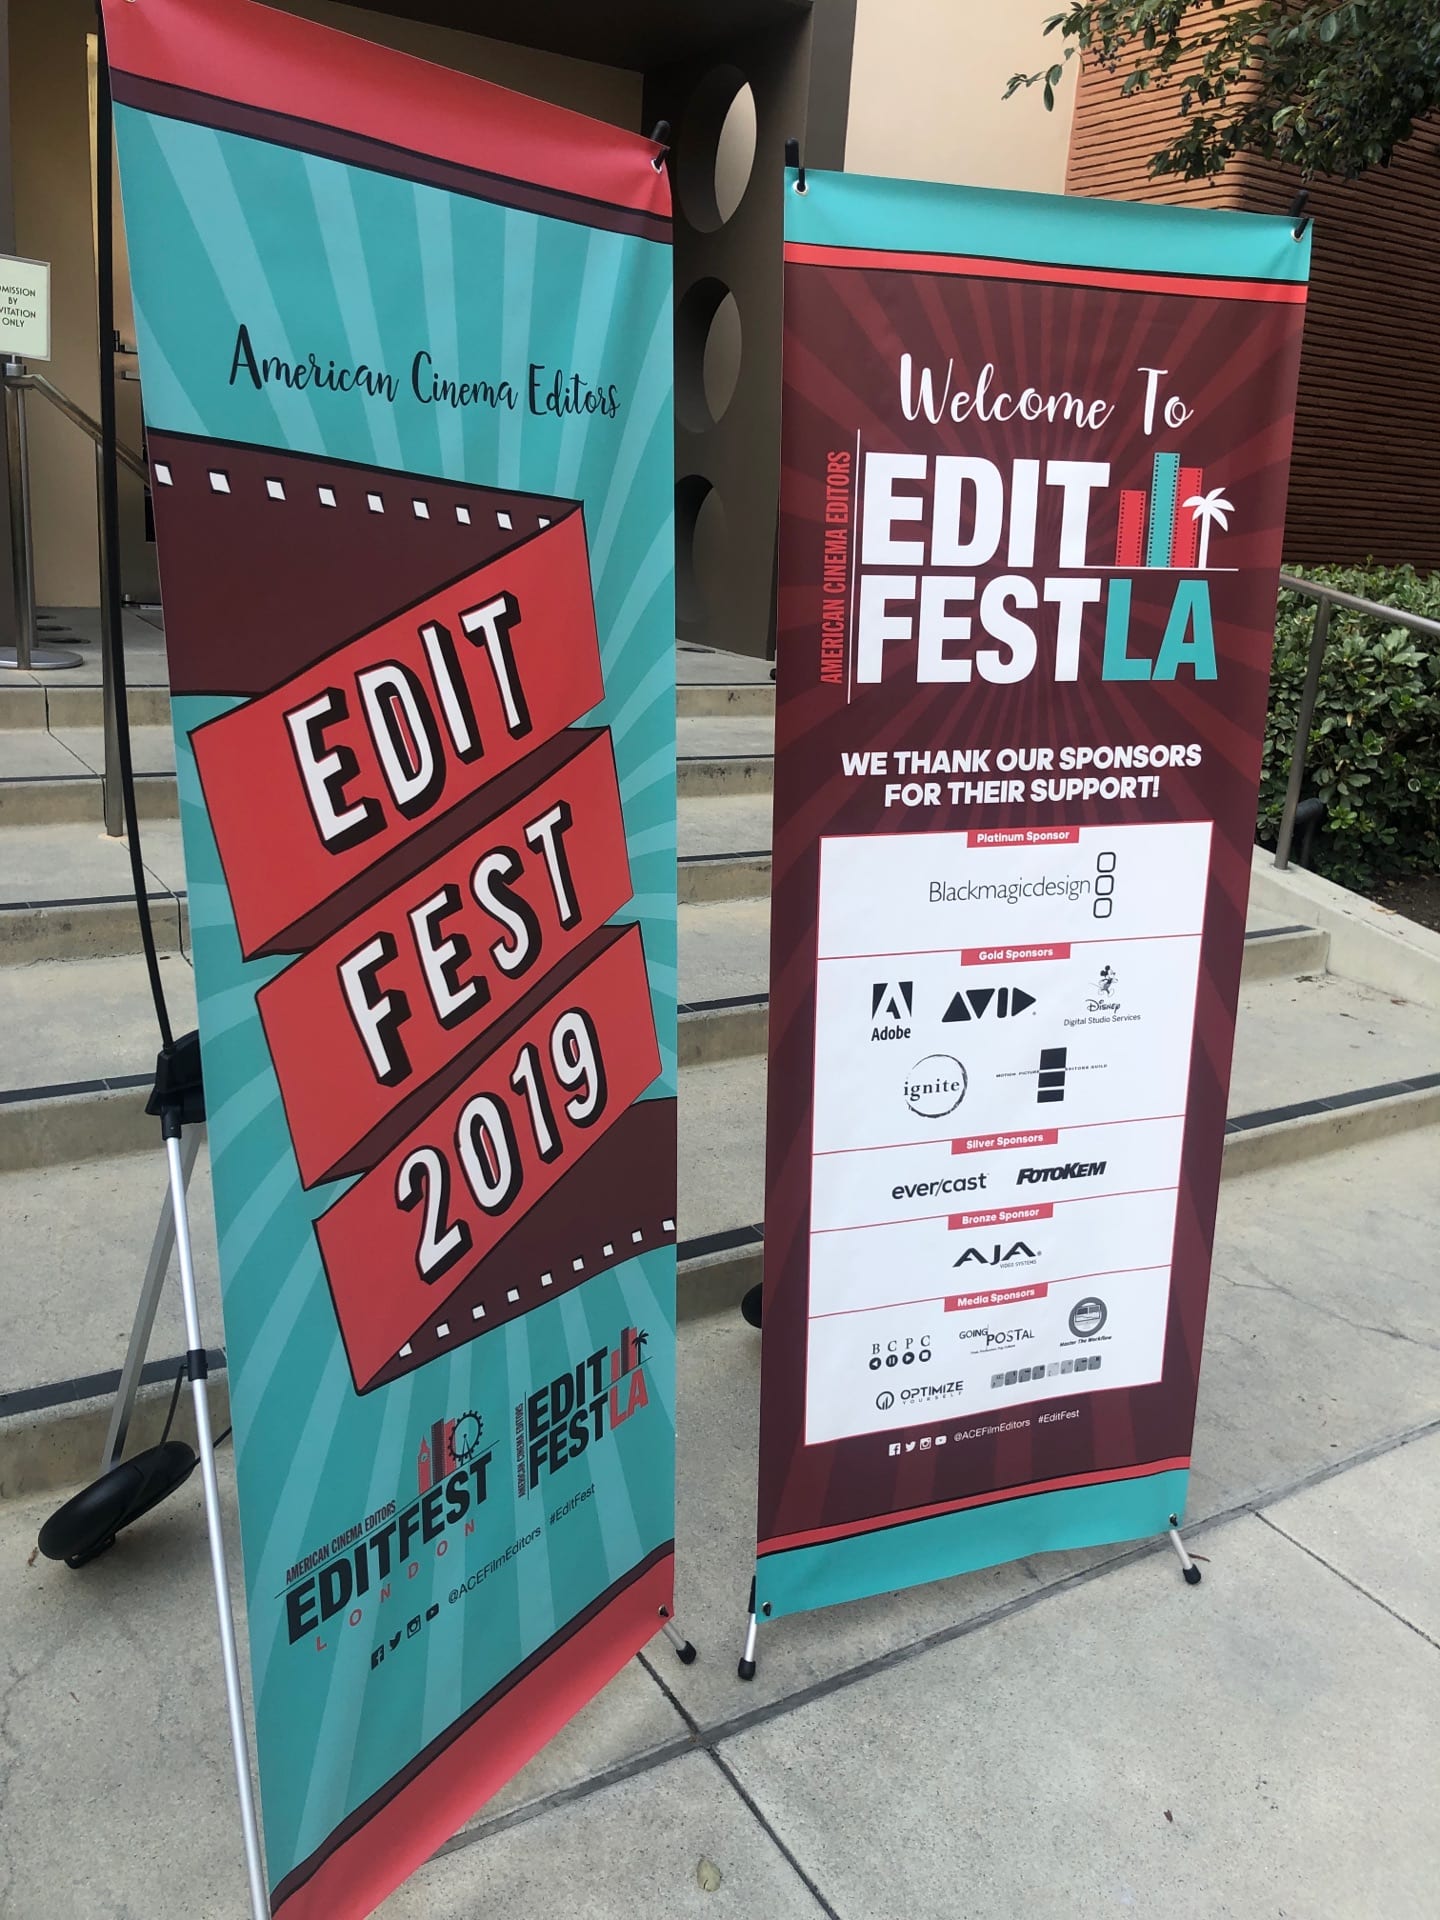 American Cinema Editors Editfest 2019 sponsored by Blackmagic Design Two tall banners promoting the event